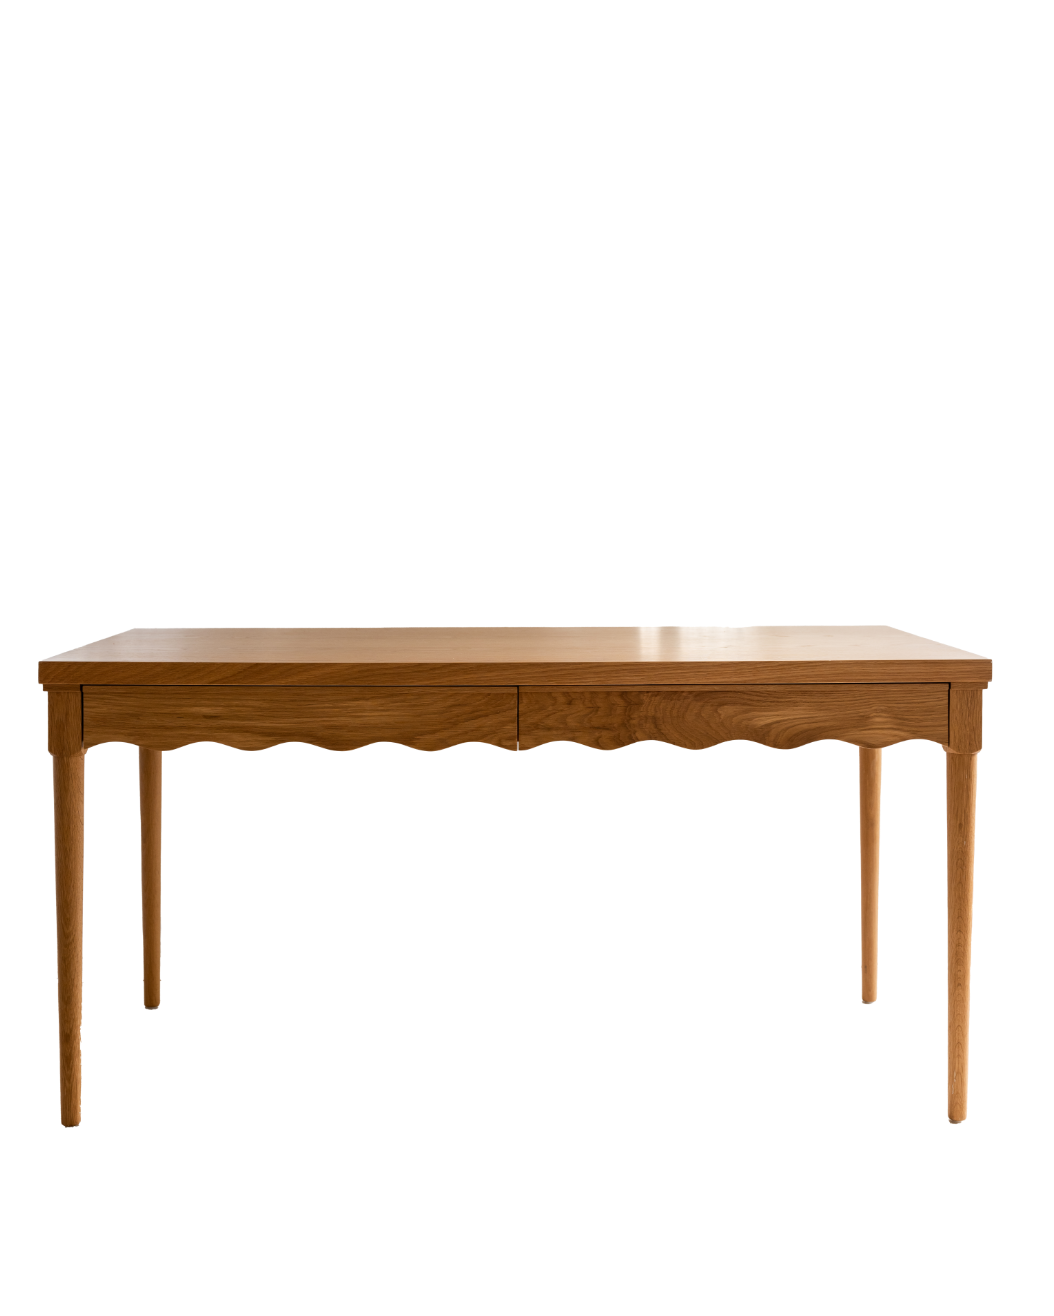 Desk with two drawers and scalloped edge